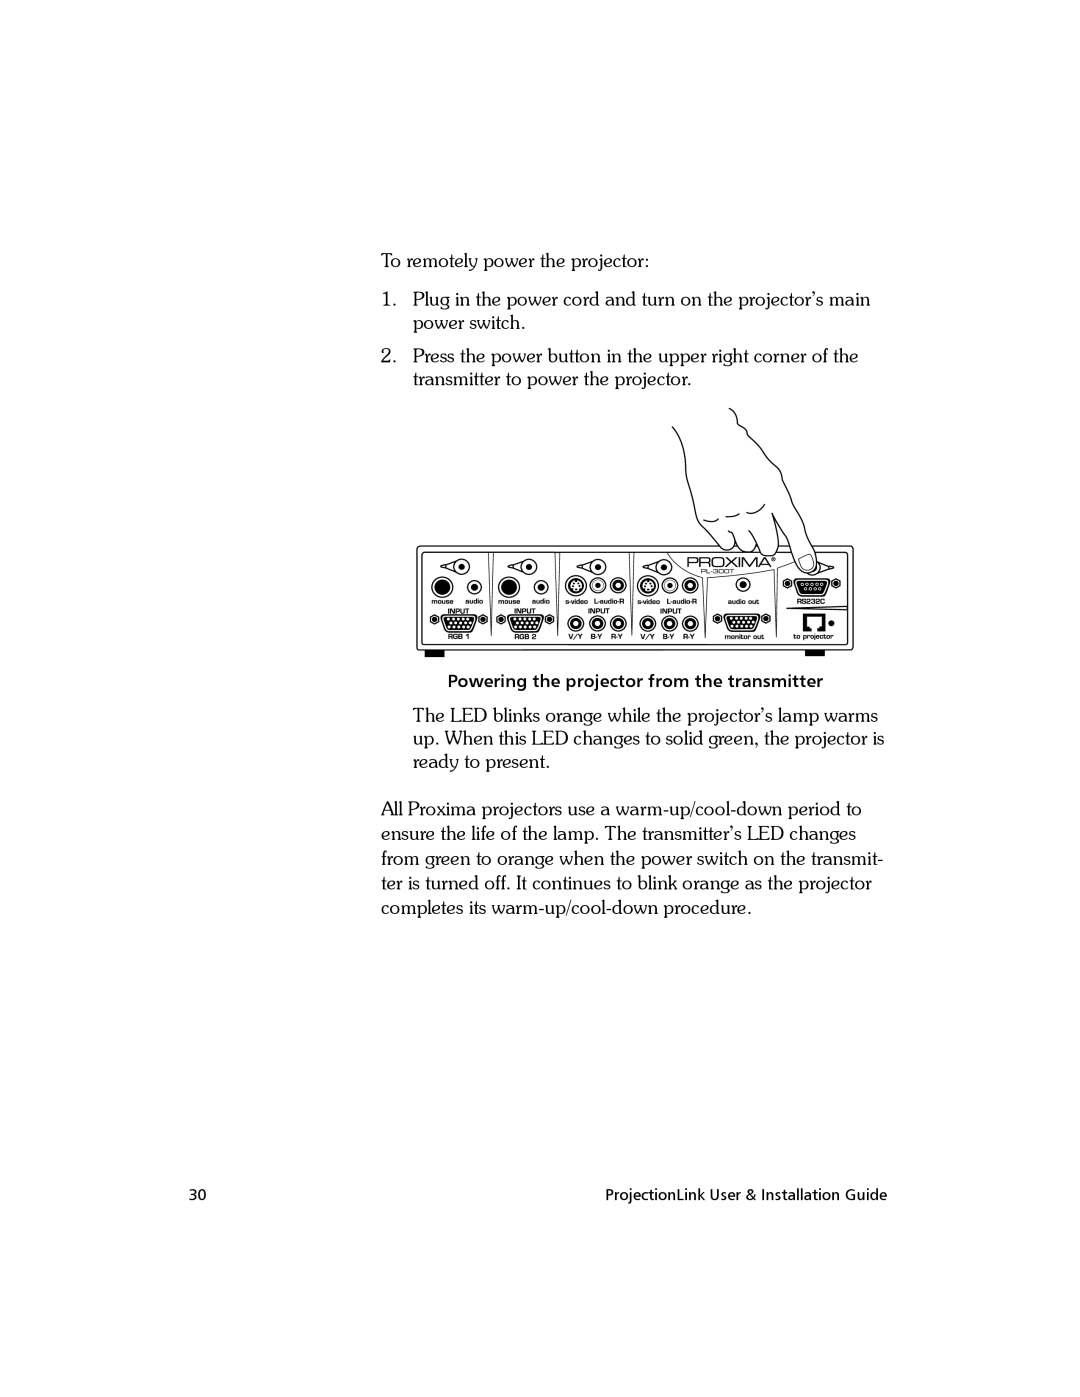 Proxima ASA PL-300E, BNDL-001 manual To remotely power the projector 